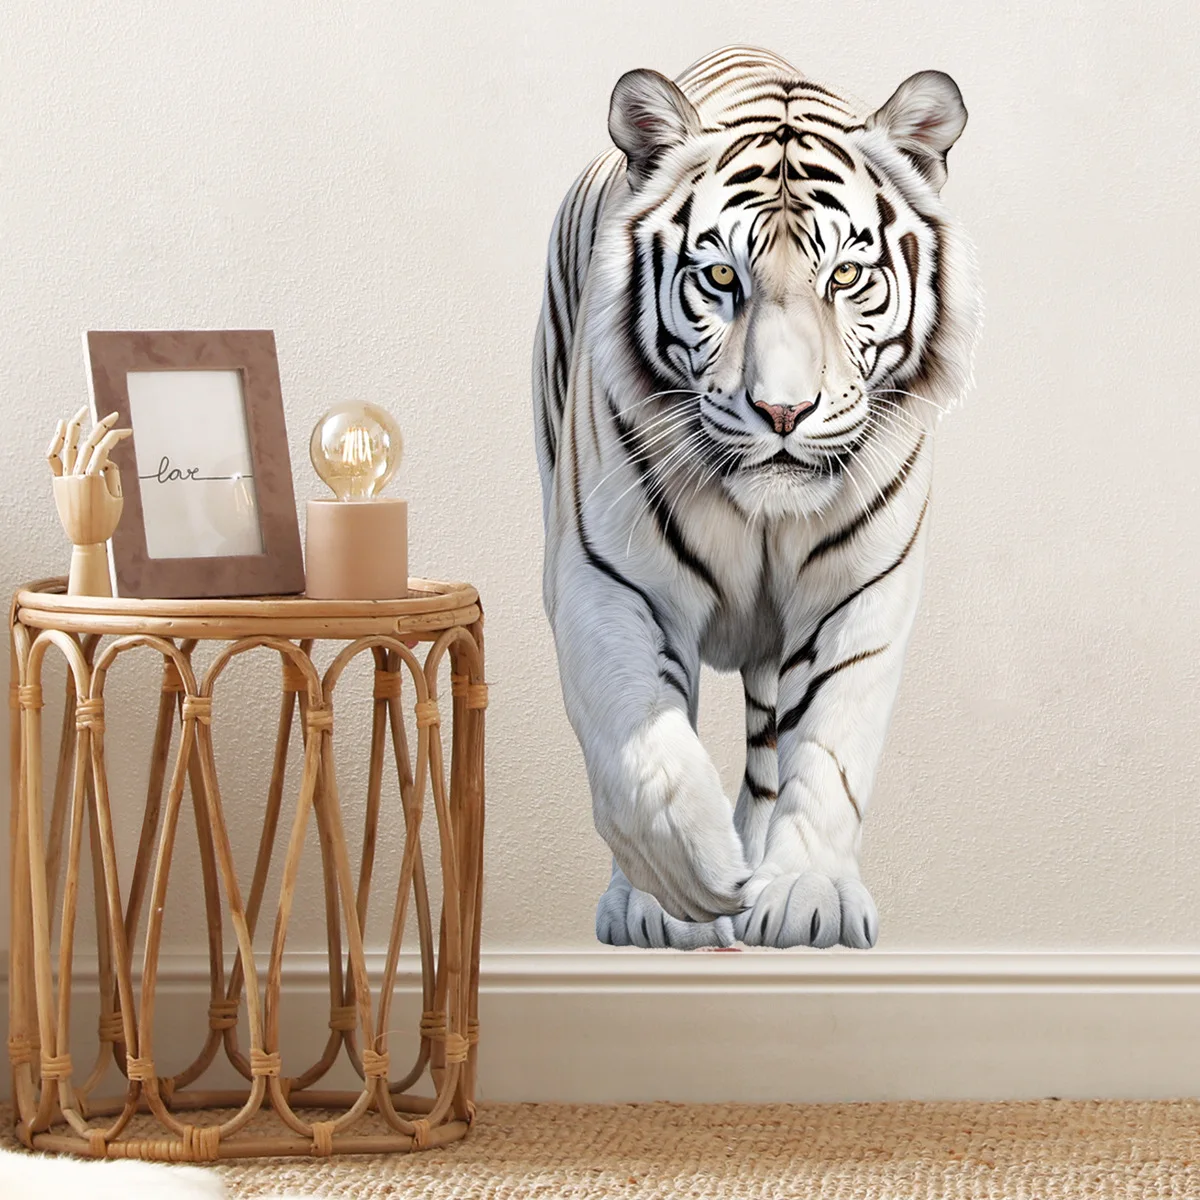 30*60cm Simulation Tiger Animal Wall Stickers Living Room Balcony Background Decorative Wall Stickers Ugly Wall Stickers Bm4083